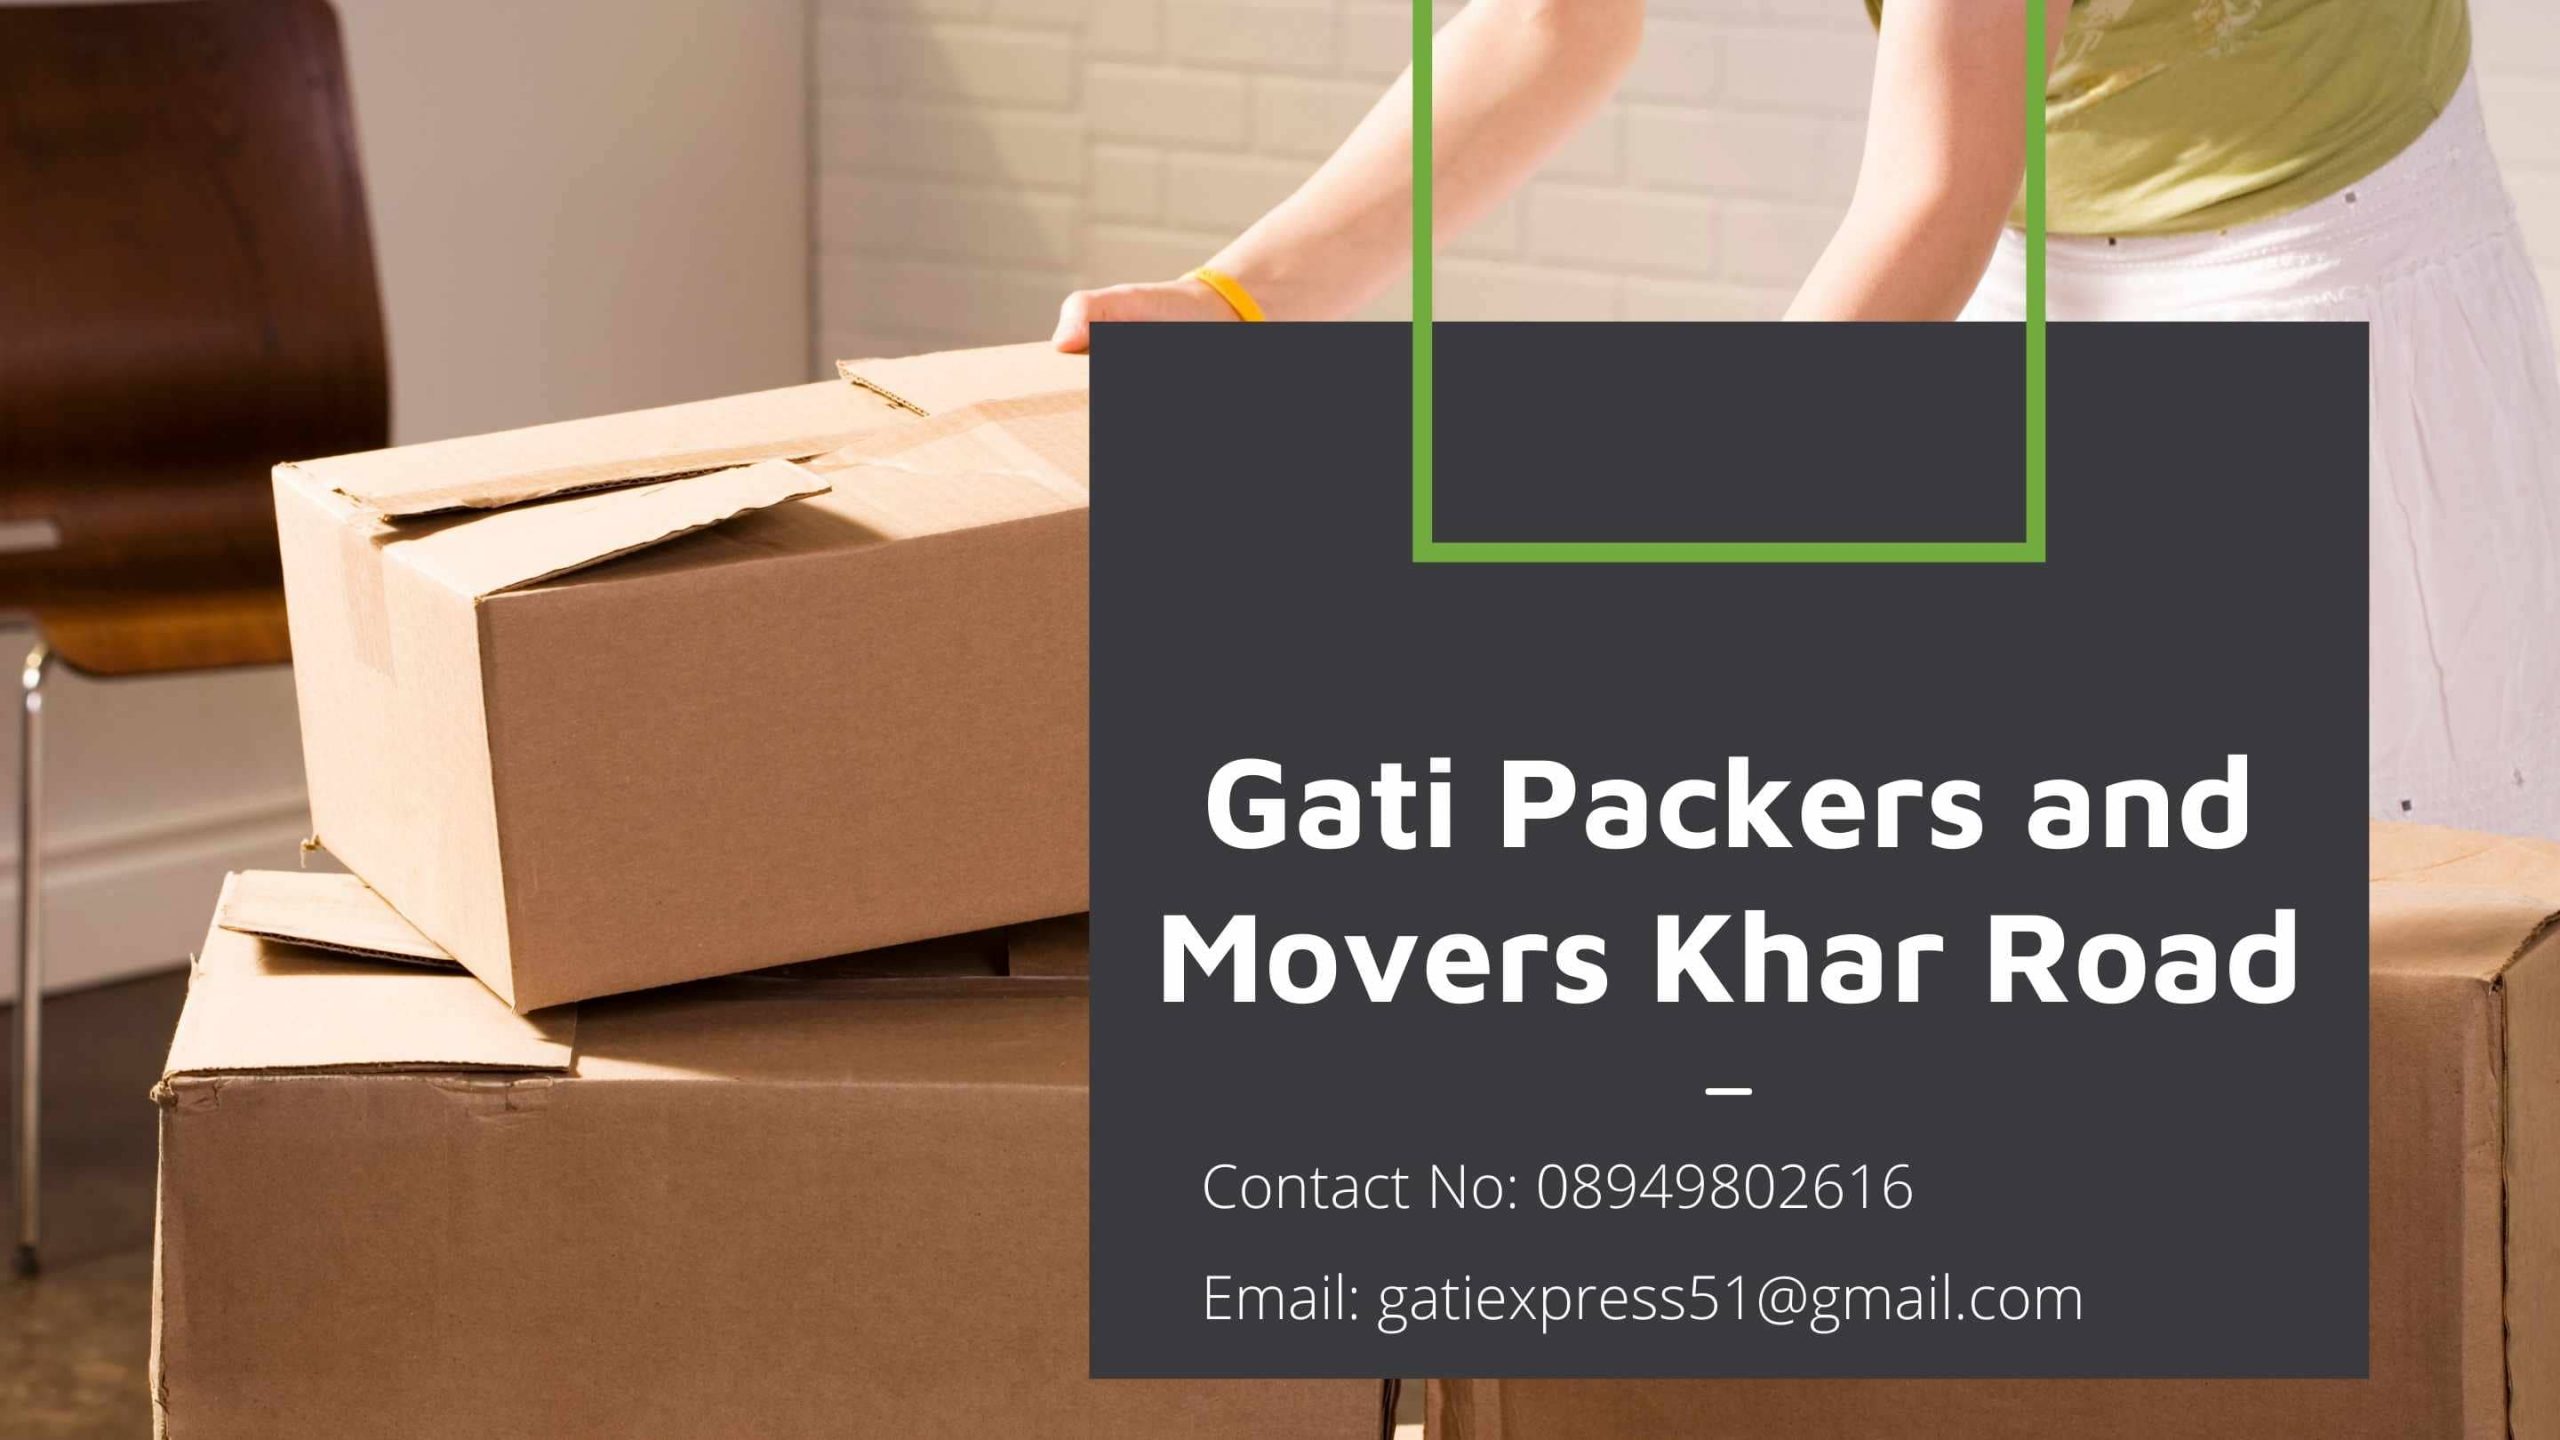 gati packers and movers khar road